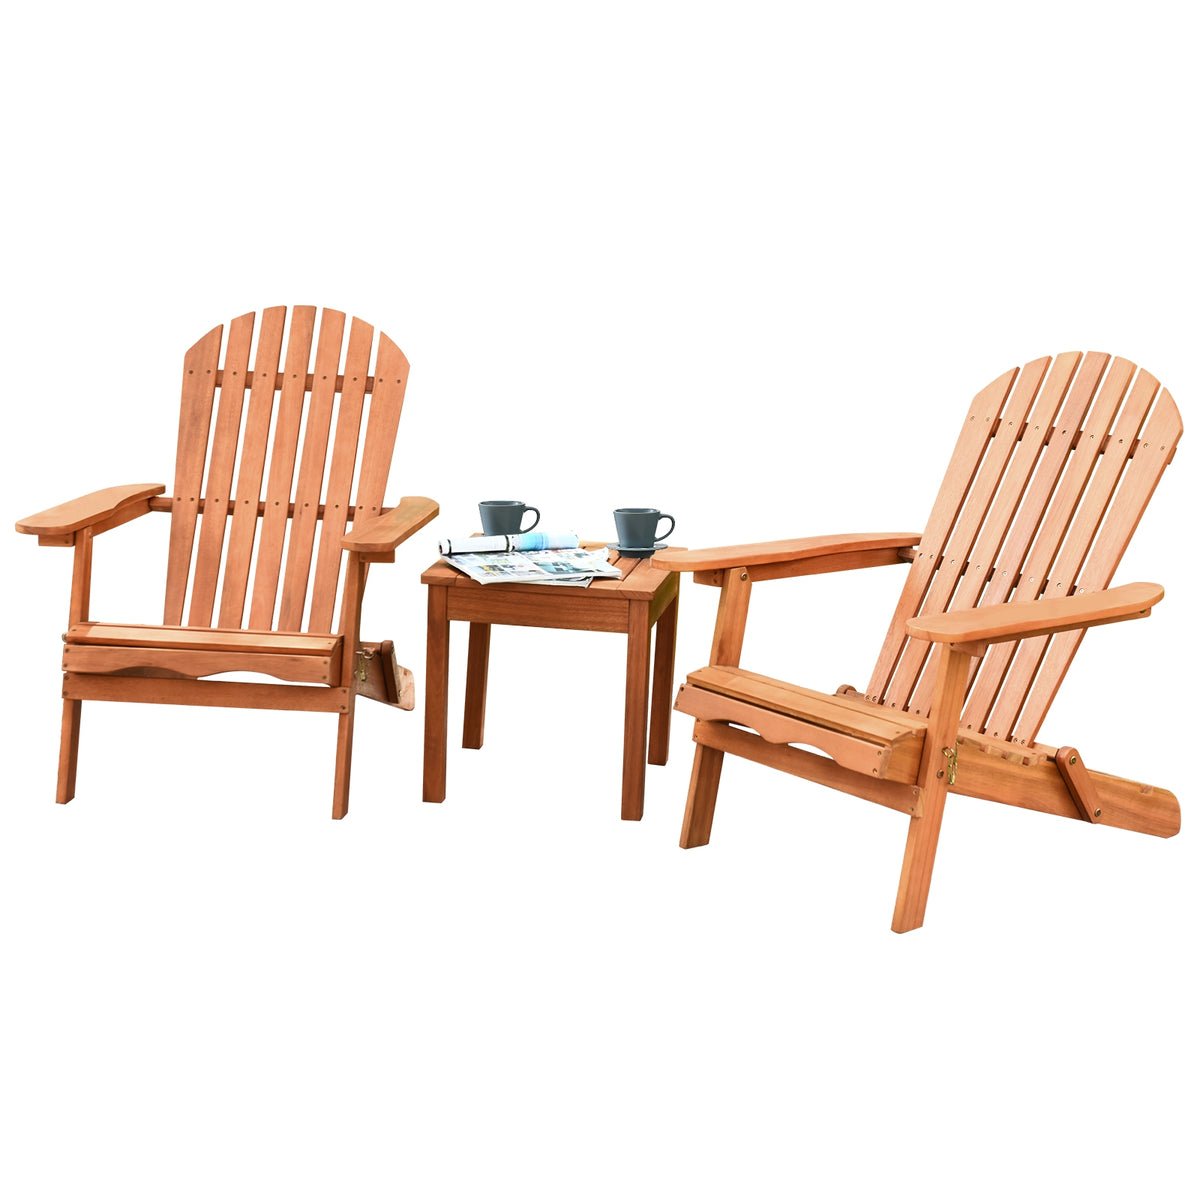 3 Pieces Adirondack Chair Set with Widened Armrest for Outdoor Patio, Pool, Garden